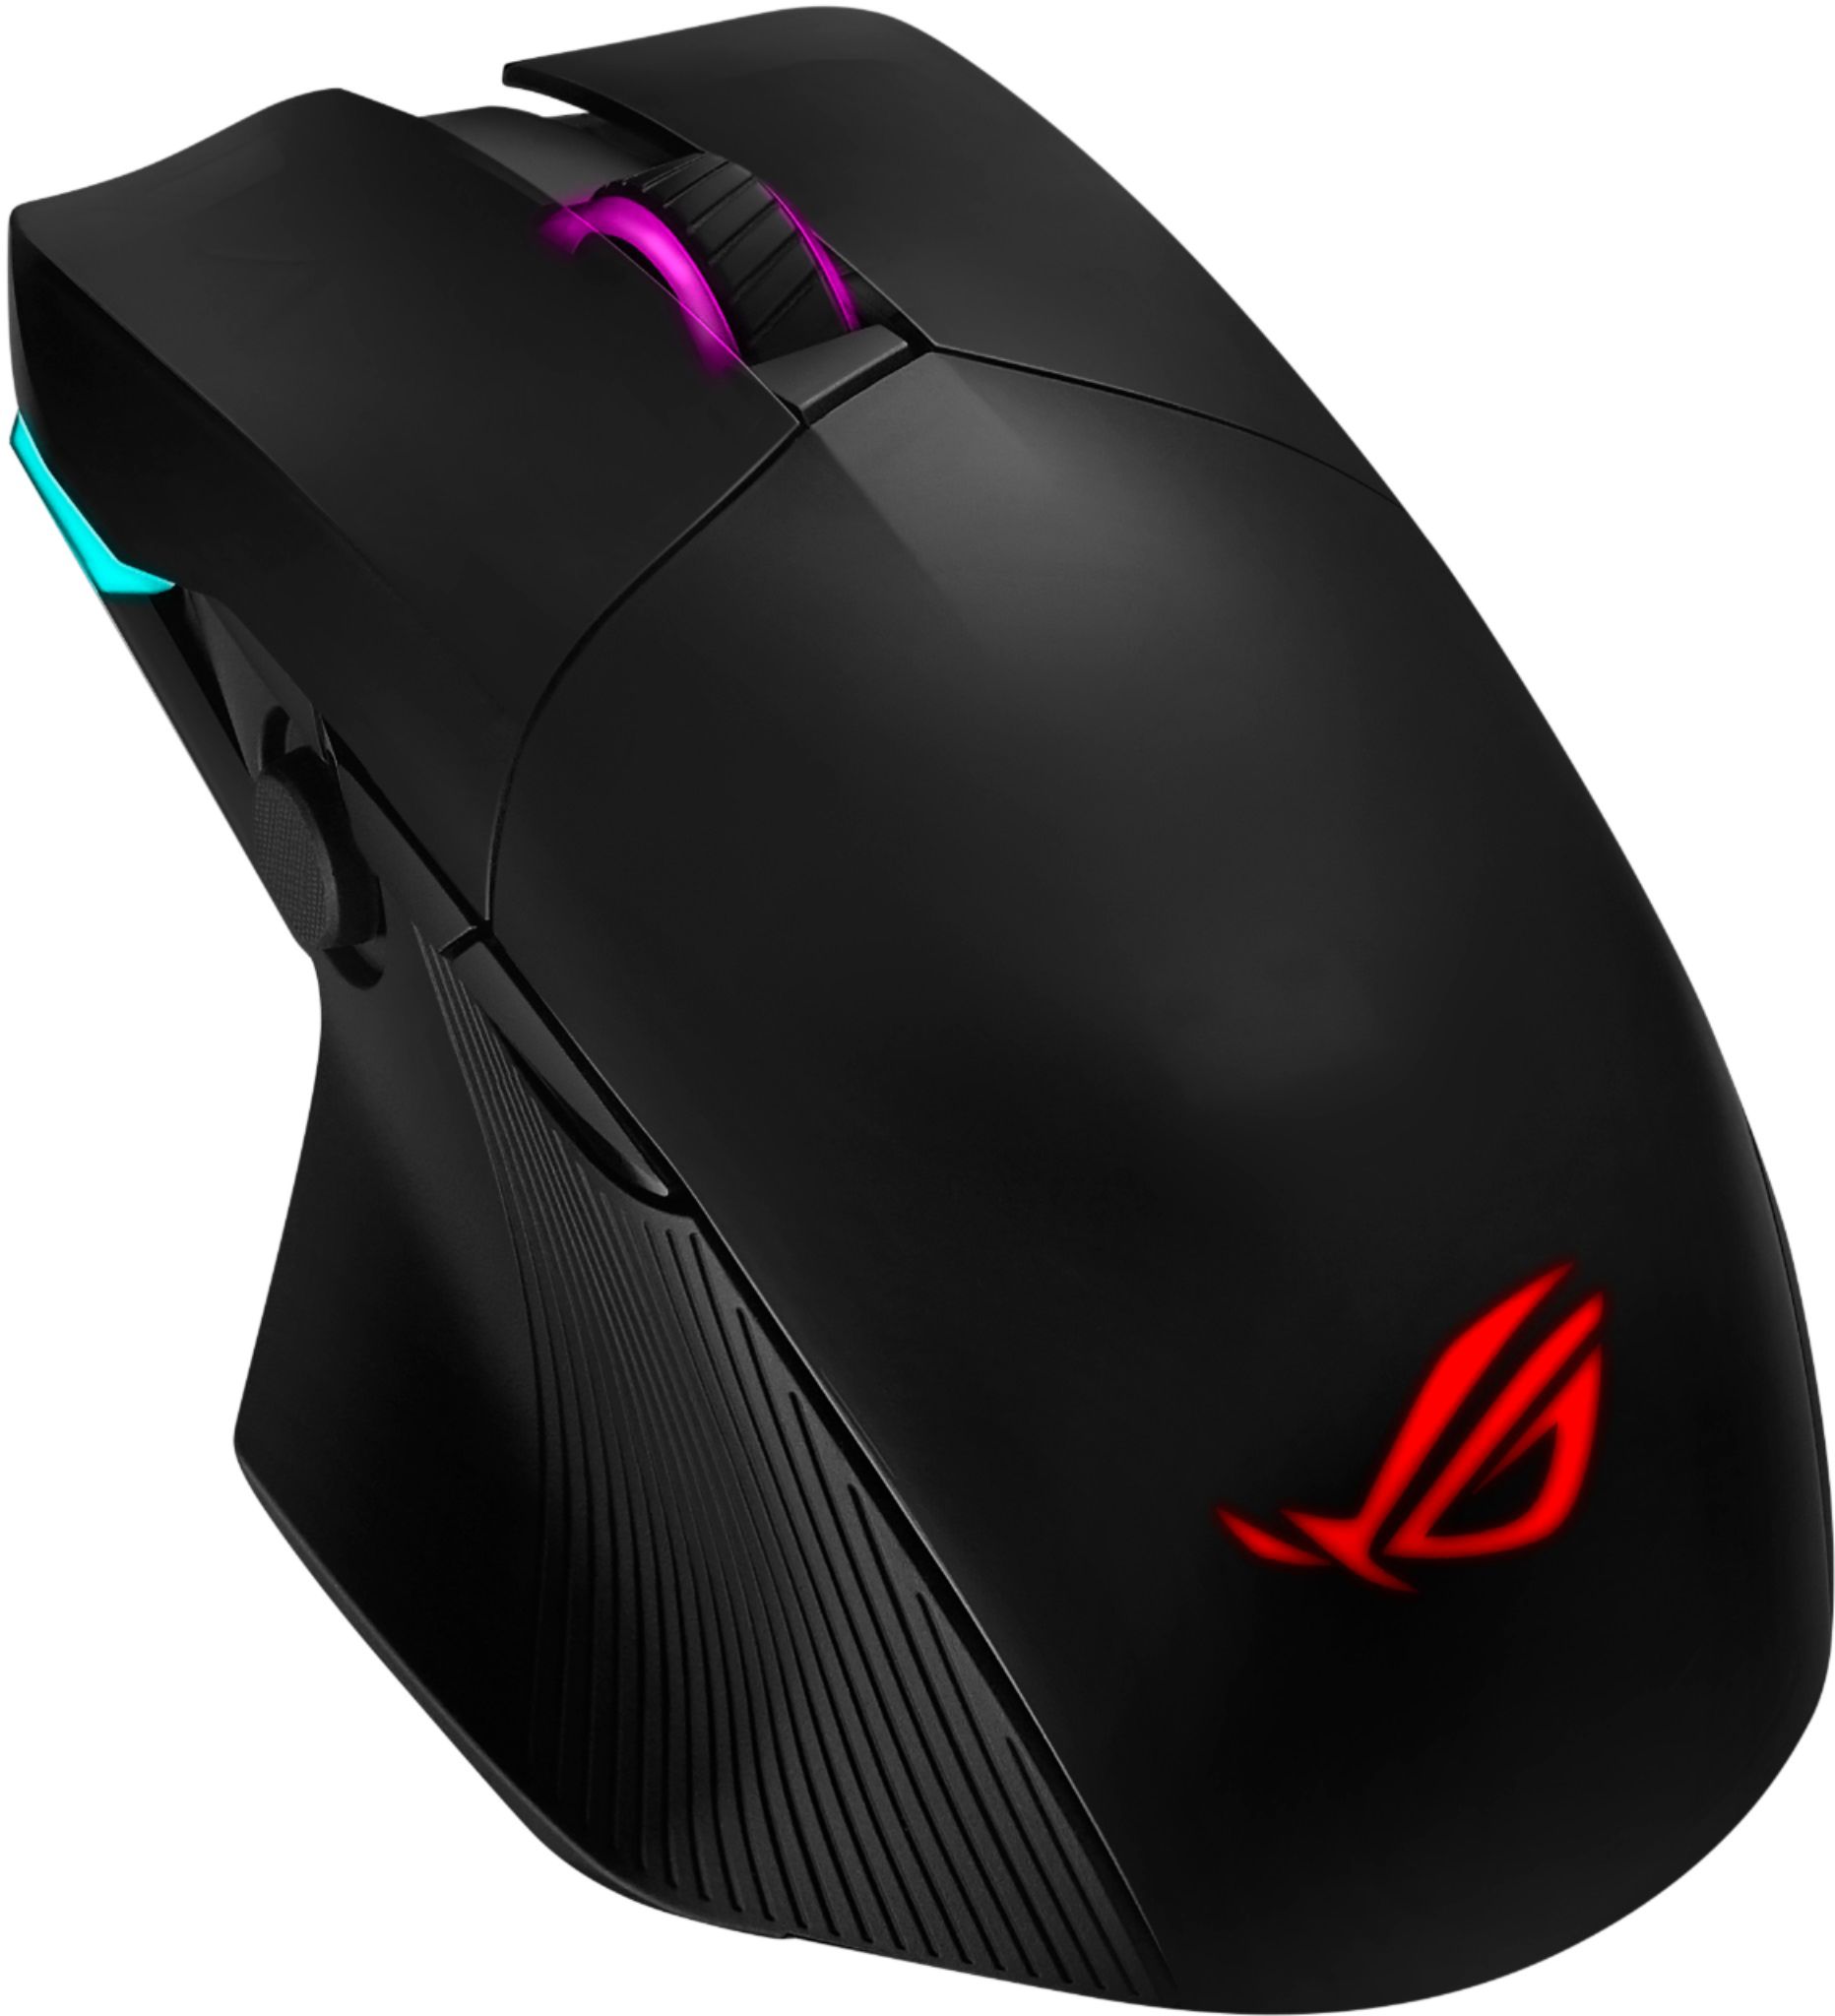 Back View: GAMDIAS - ZEUS M2 Wired Optical Gaming Mouse - Black